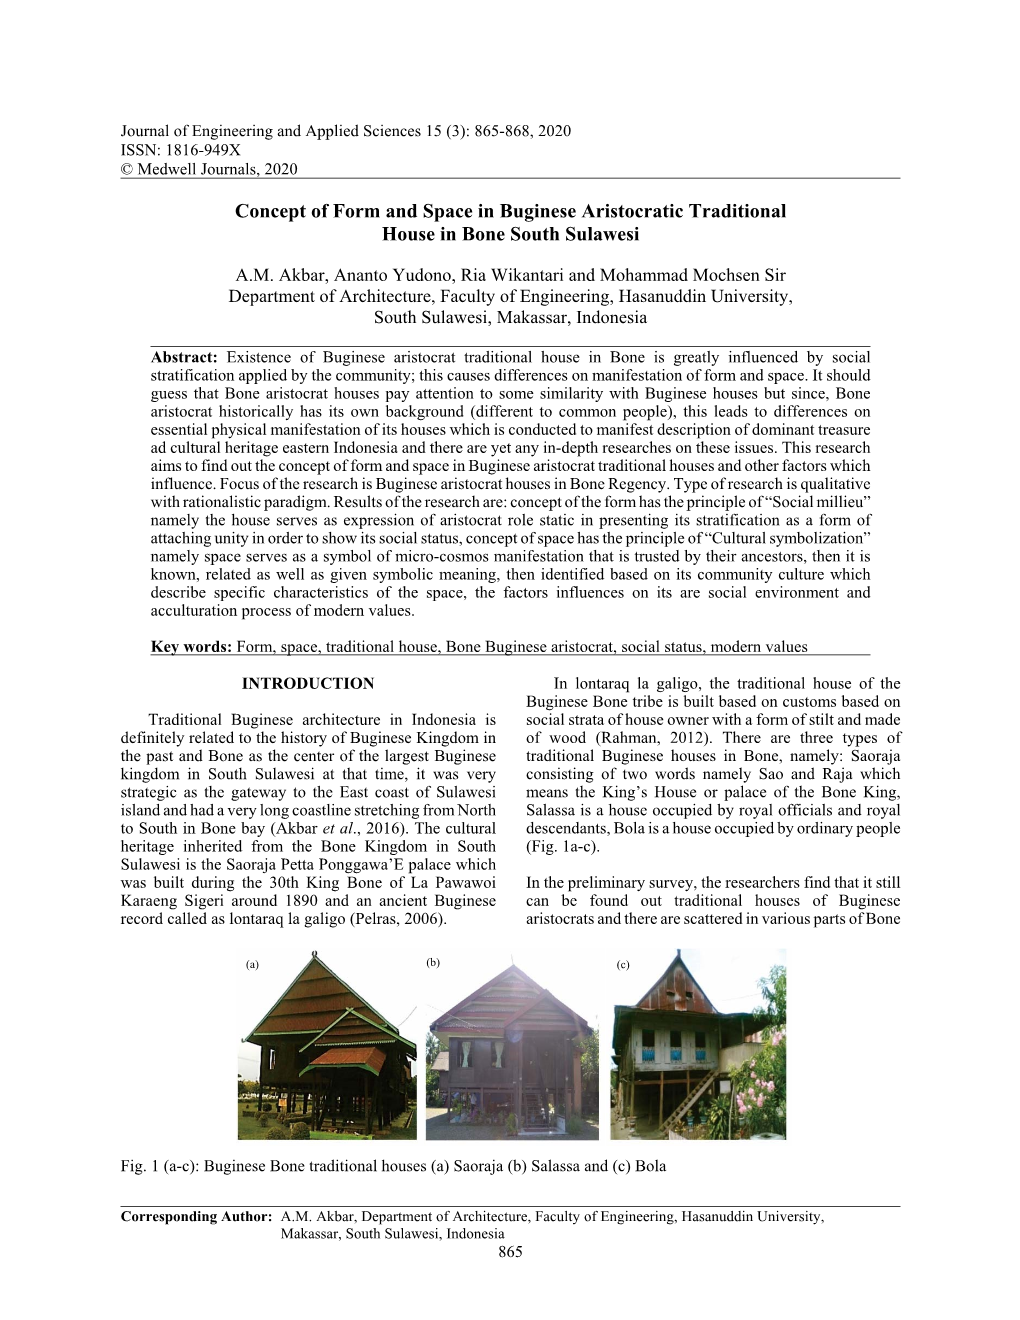 Concept of Form and Space in Buginese Aristocratic Traditional House in Bone South Sulawesi